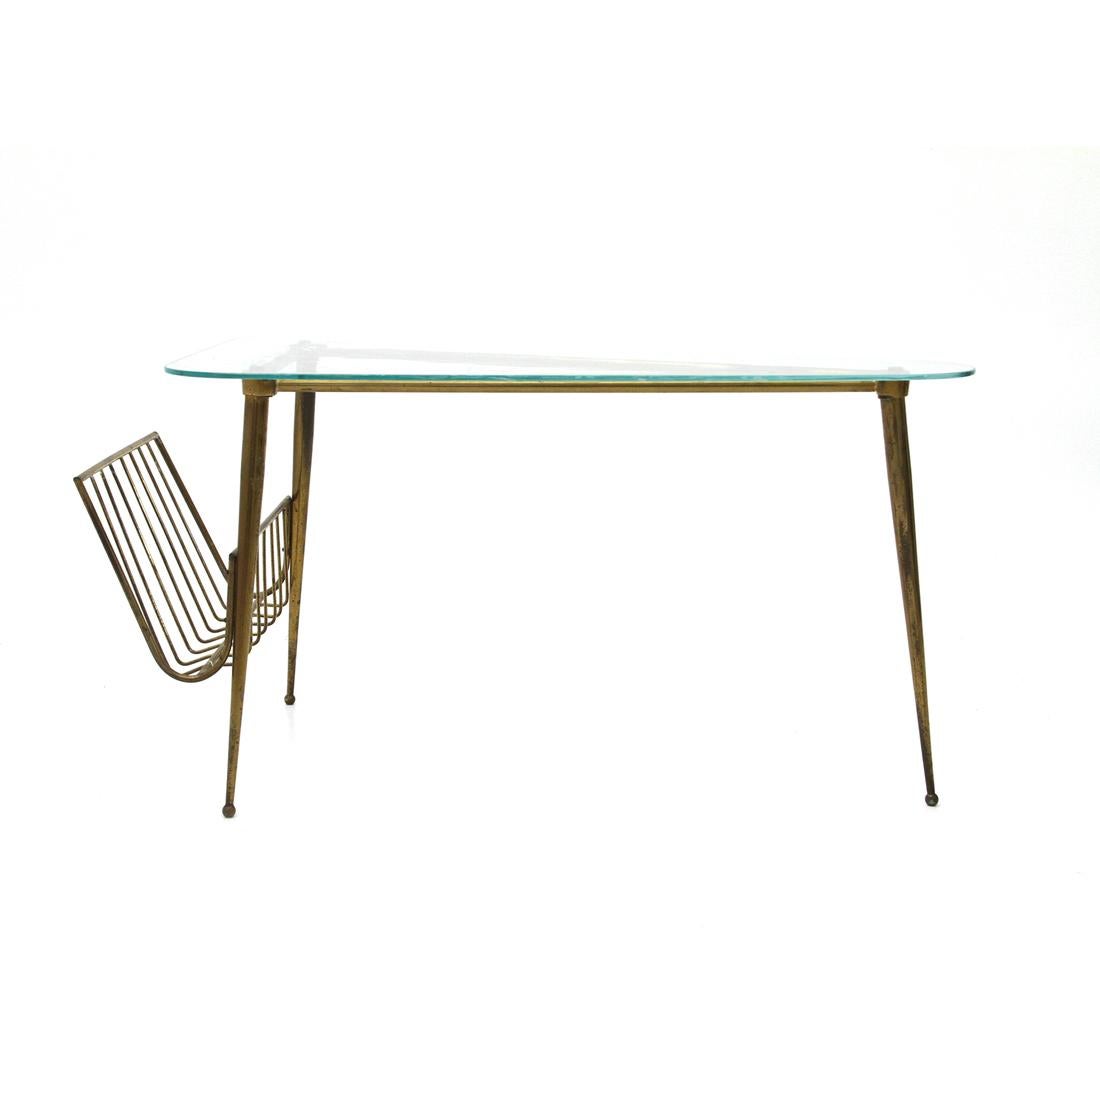 Coffee table of Italian manufacture of the 1950s.
Triangular brass structure with magazine rack on one side.
Feet of spherical shape.
Glass top with rounded corners and floral decorations.
Good general conditions, some signs due to normal use